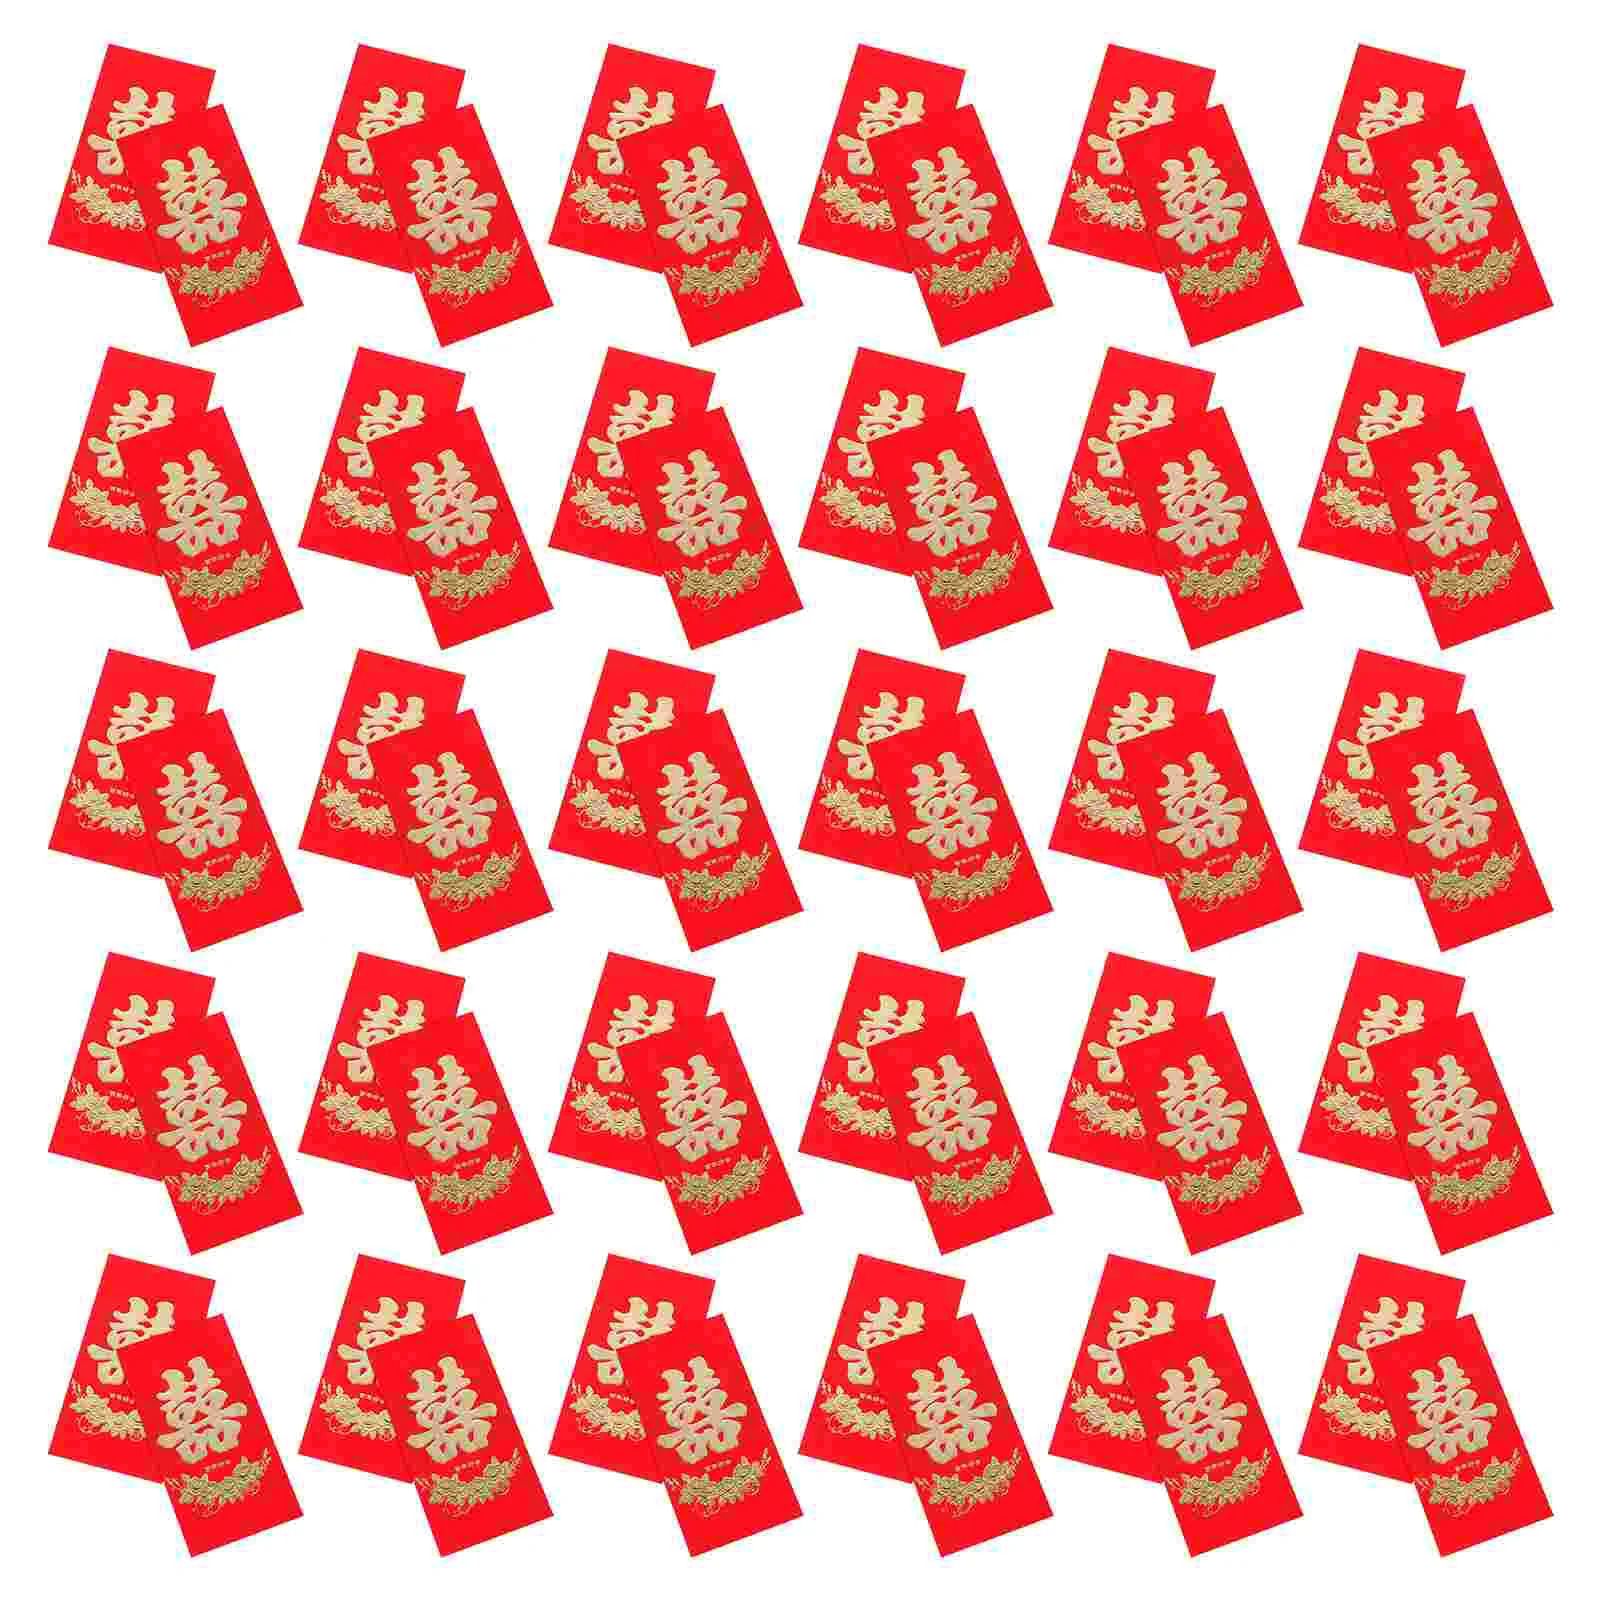 

60 Pcs Long Double Happiness Red Envelope Chinese Style Bag Traditional Pocket New Year Hong Bao Wedding Gift Money Paper